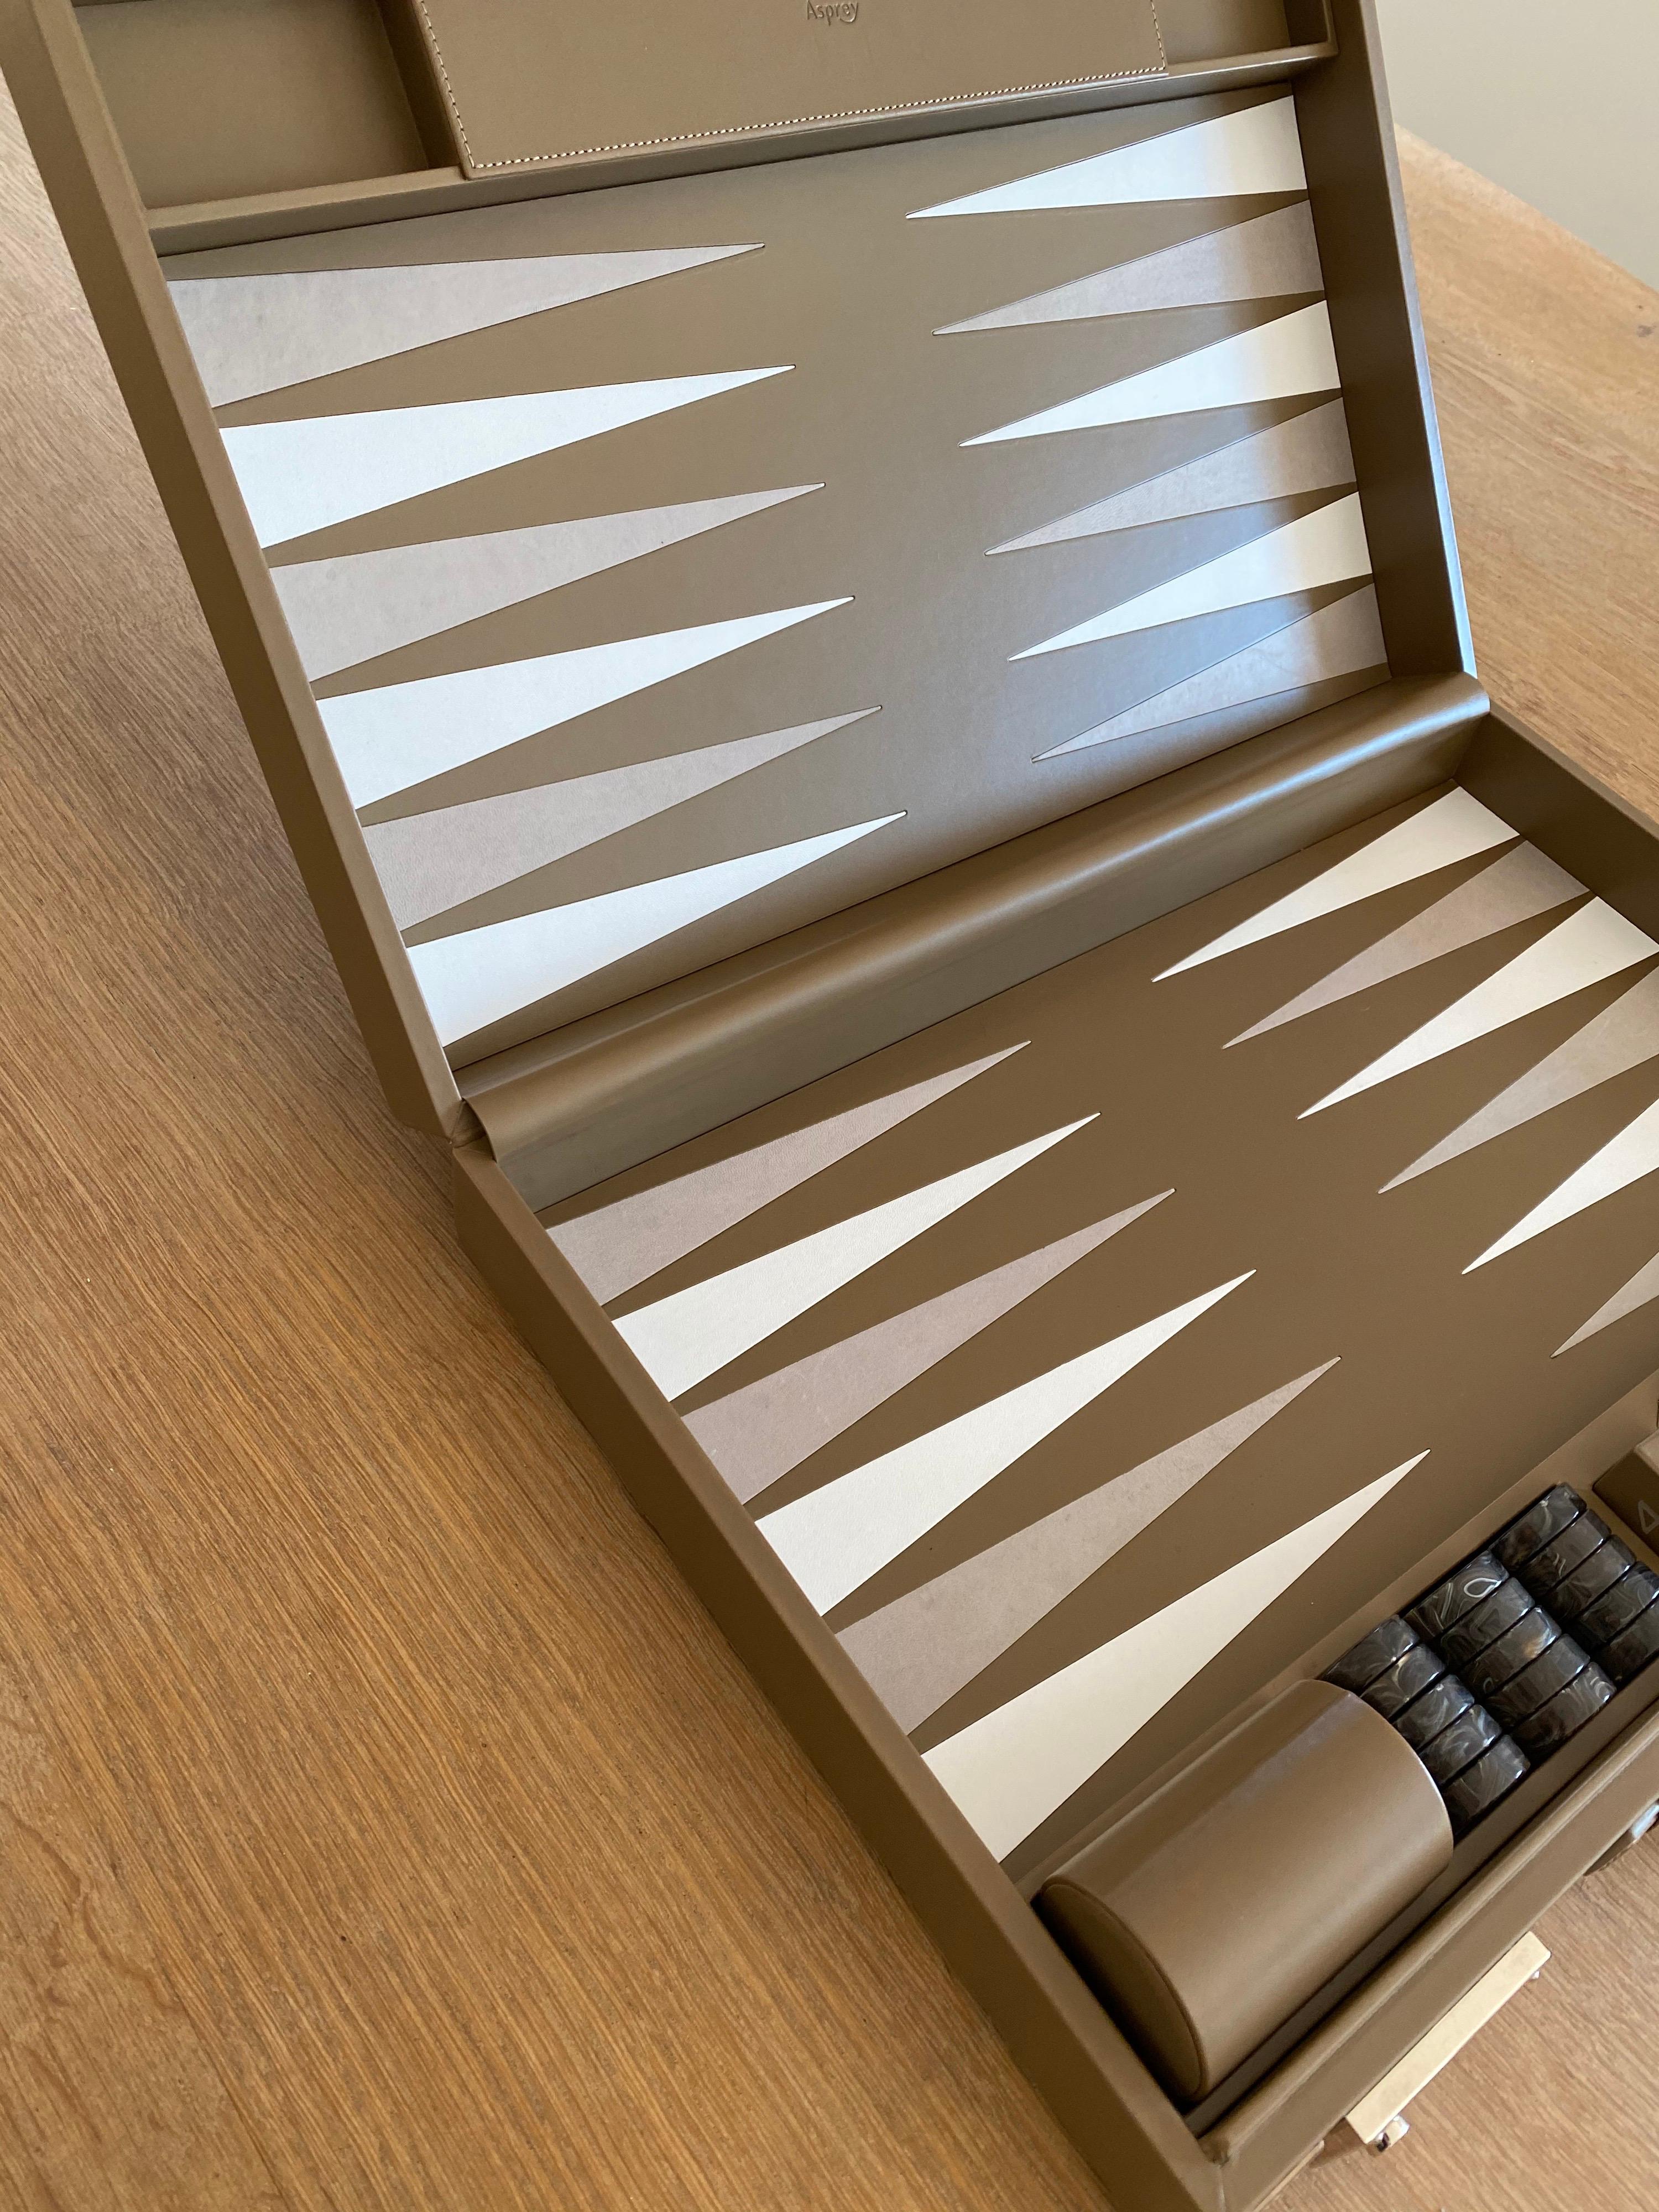 Asprey Hanover Backgammon set is a carefully considered combination of materials - selected to suit all levels of play, from the professional player to the recreational and new player. The exterior case of saddle leather features defining stitch